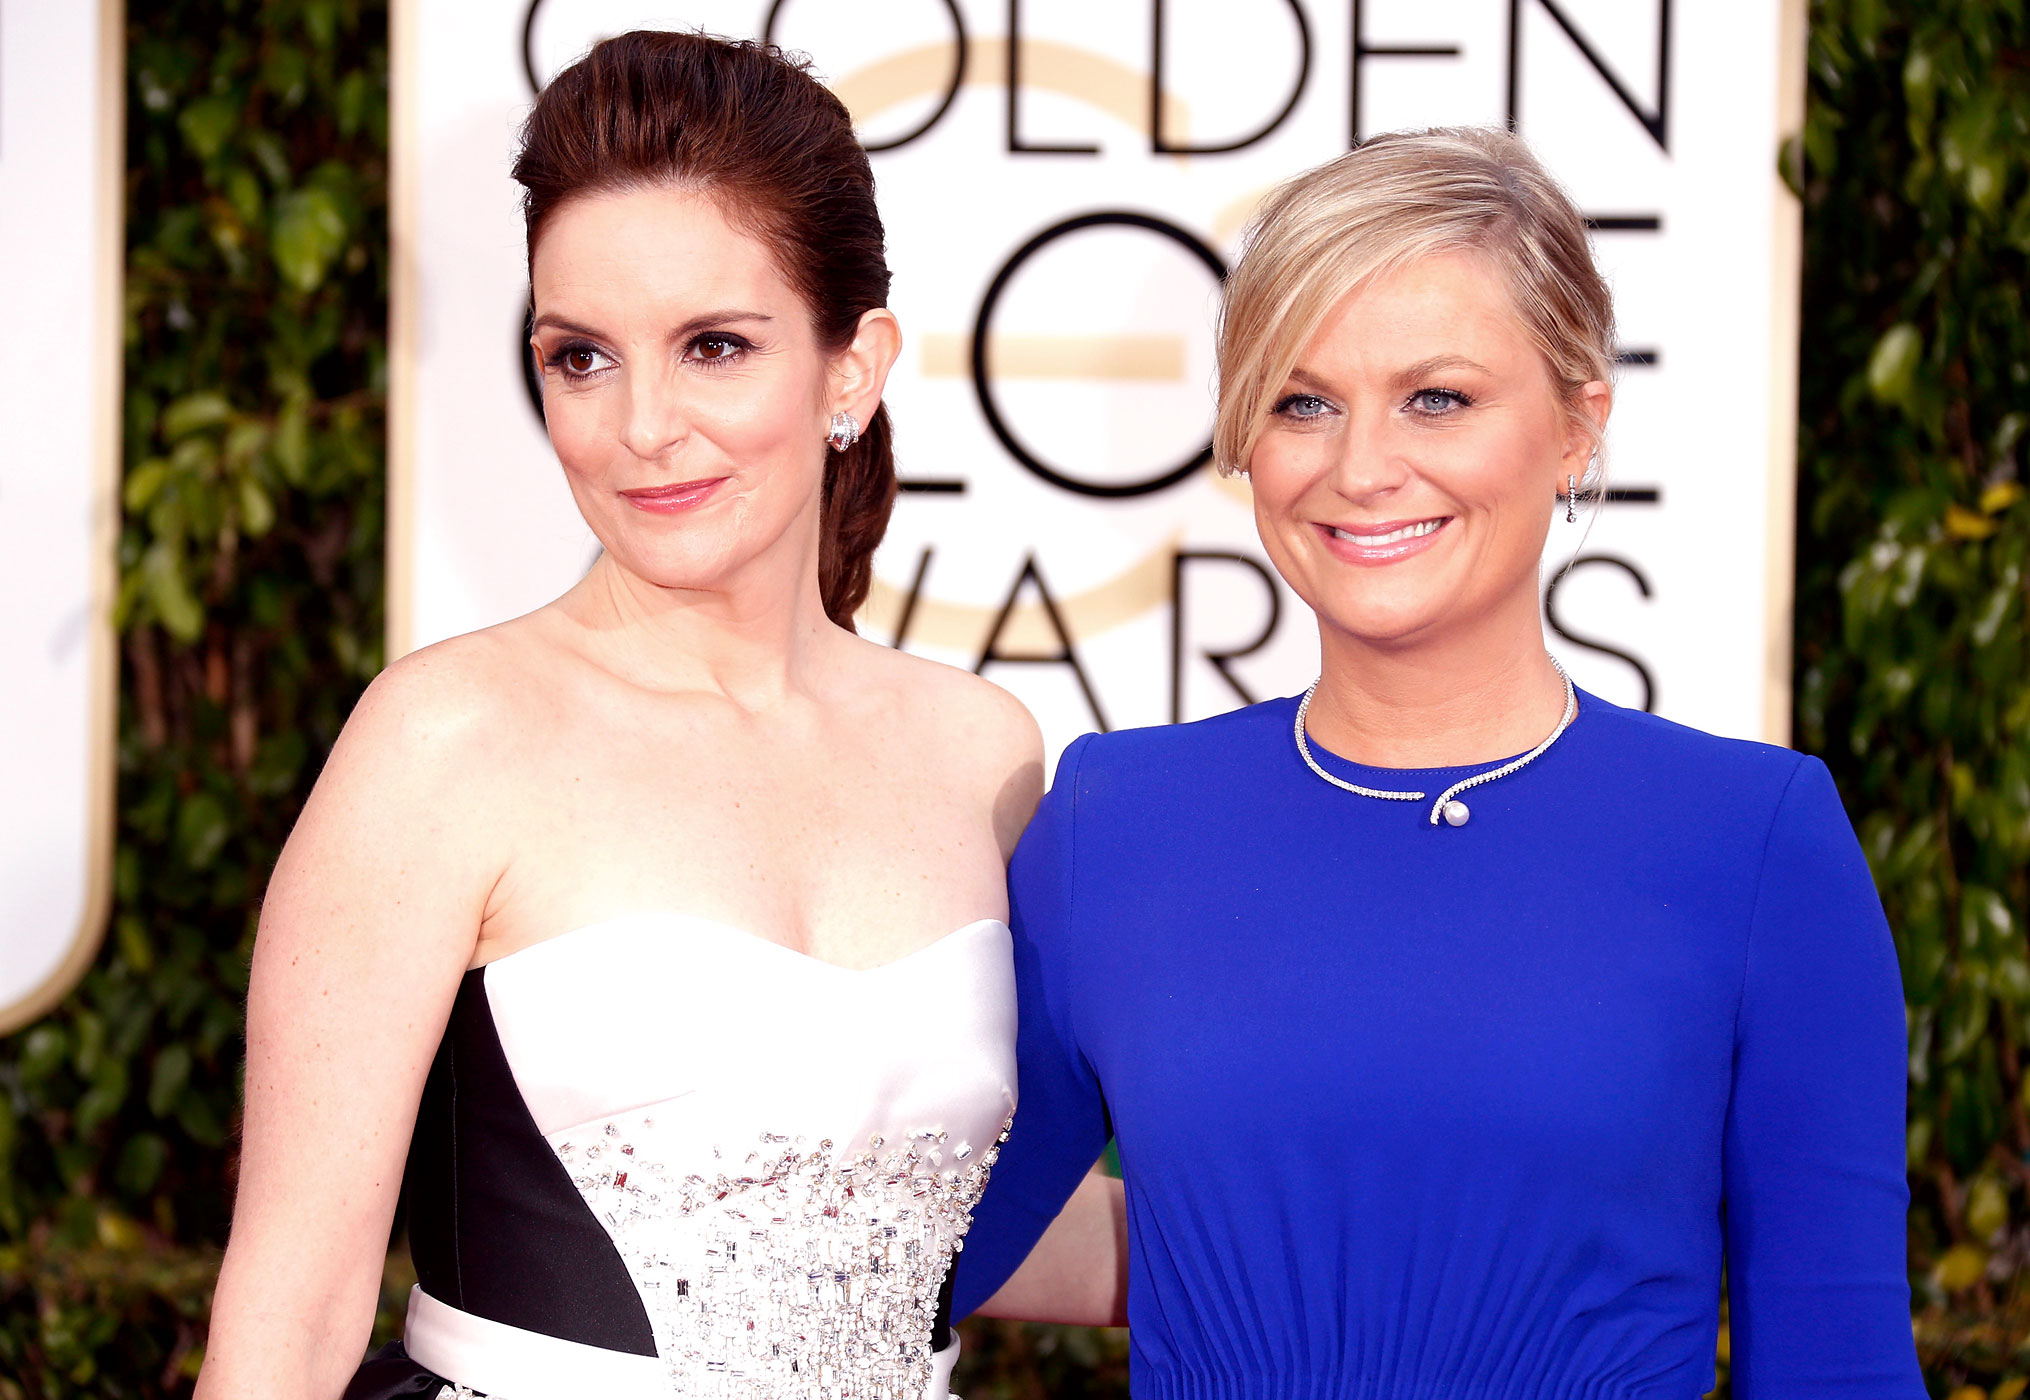 Hosts Tina Fey and Amy Poehler attend the 72nd Annual Golden Globe Awards at The Beverly Hilton Hotel on Jan. 11, 2015 in Beverly Hills, Calif. (Jeff Vespa—WireImage/Getty Images)